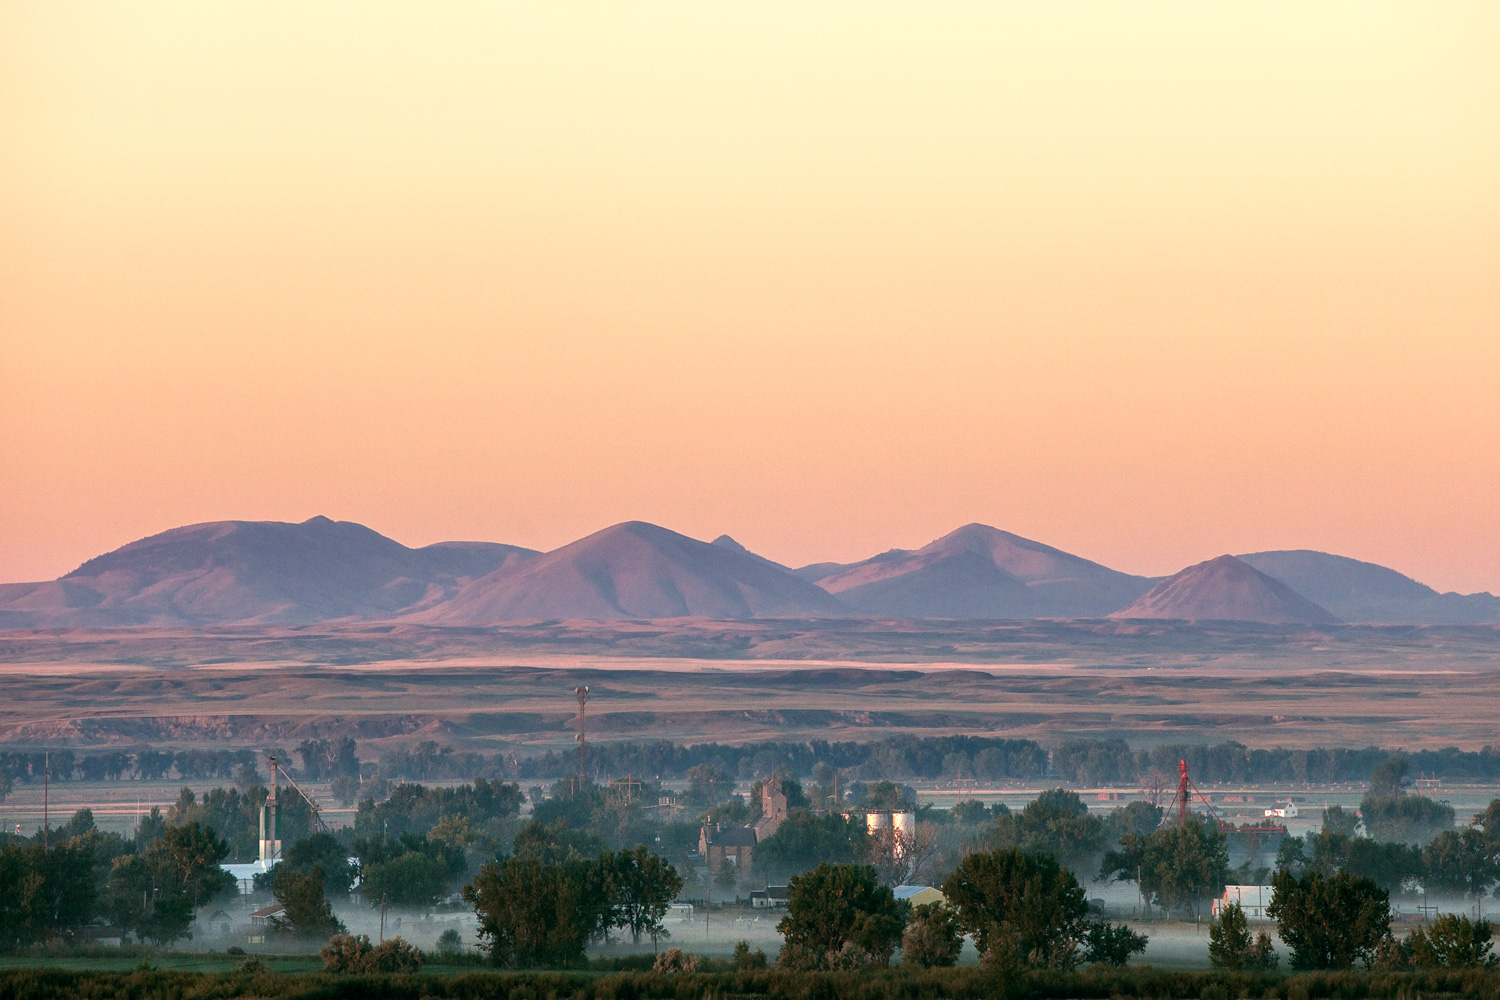 Fog drapes downtown Harlem, Montana with the Bear Paw Mountains looming large in the background.&nbsp;→ Buy a Print&nbsp;or License Photo